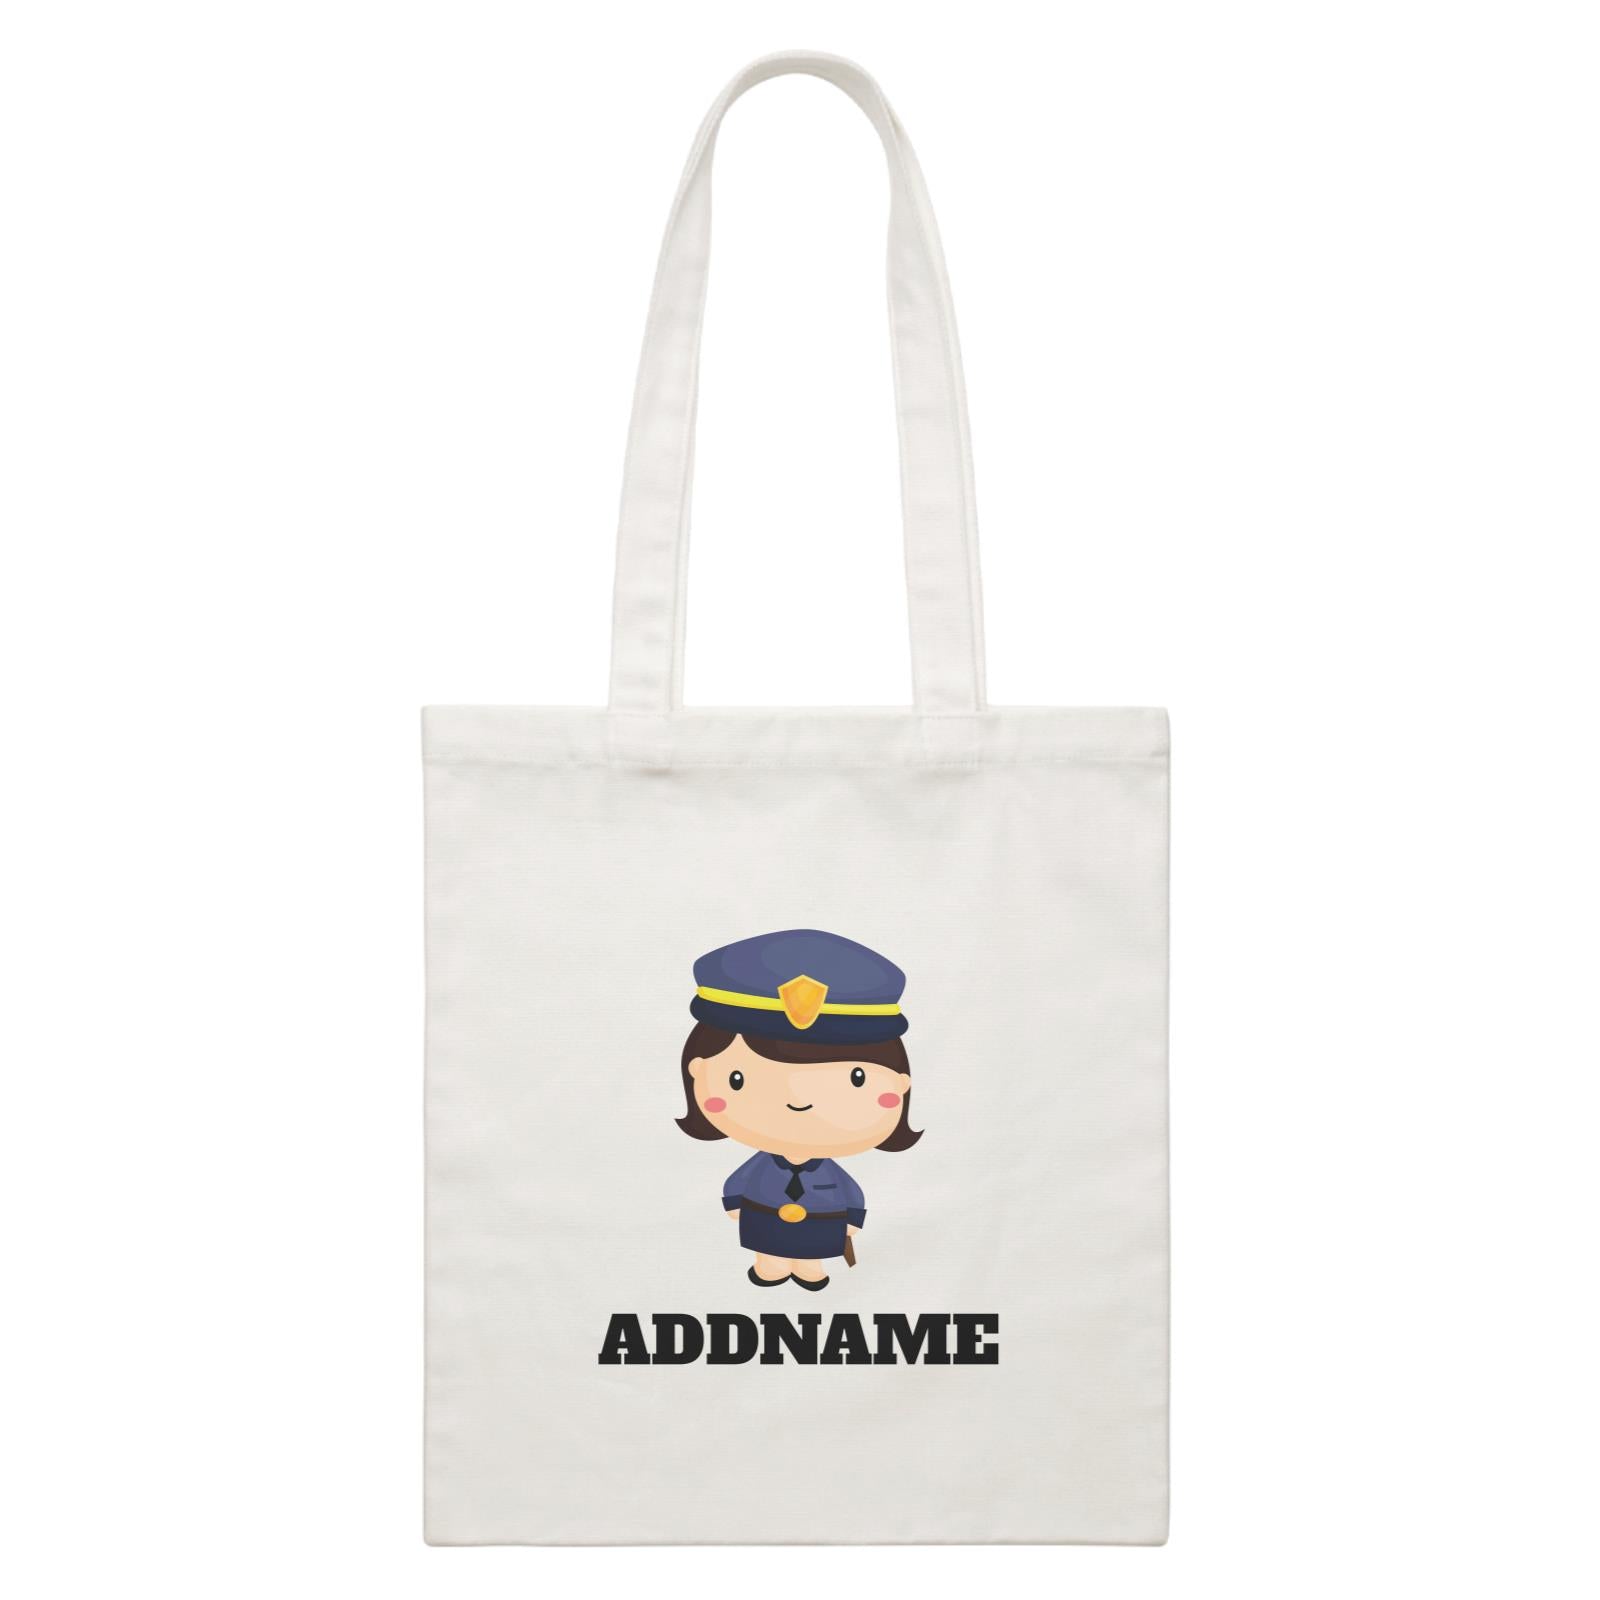 Birthday Police Officer Short Hair Girl  In Suit Addname White Canvas Bag